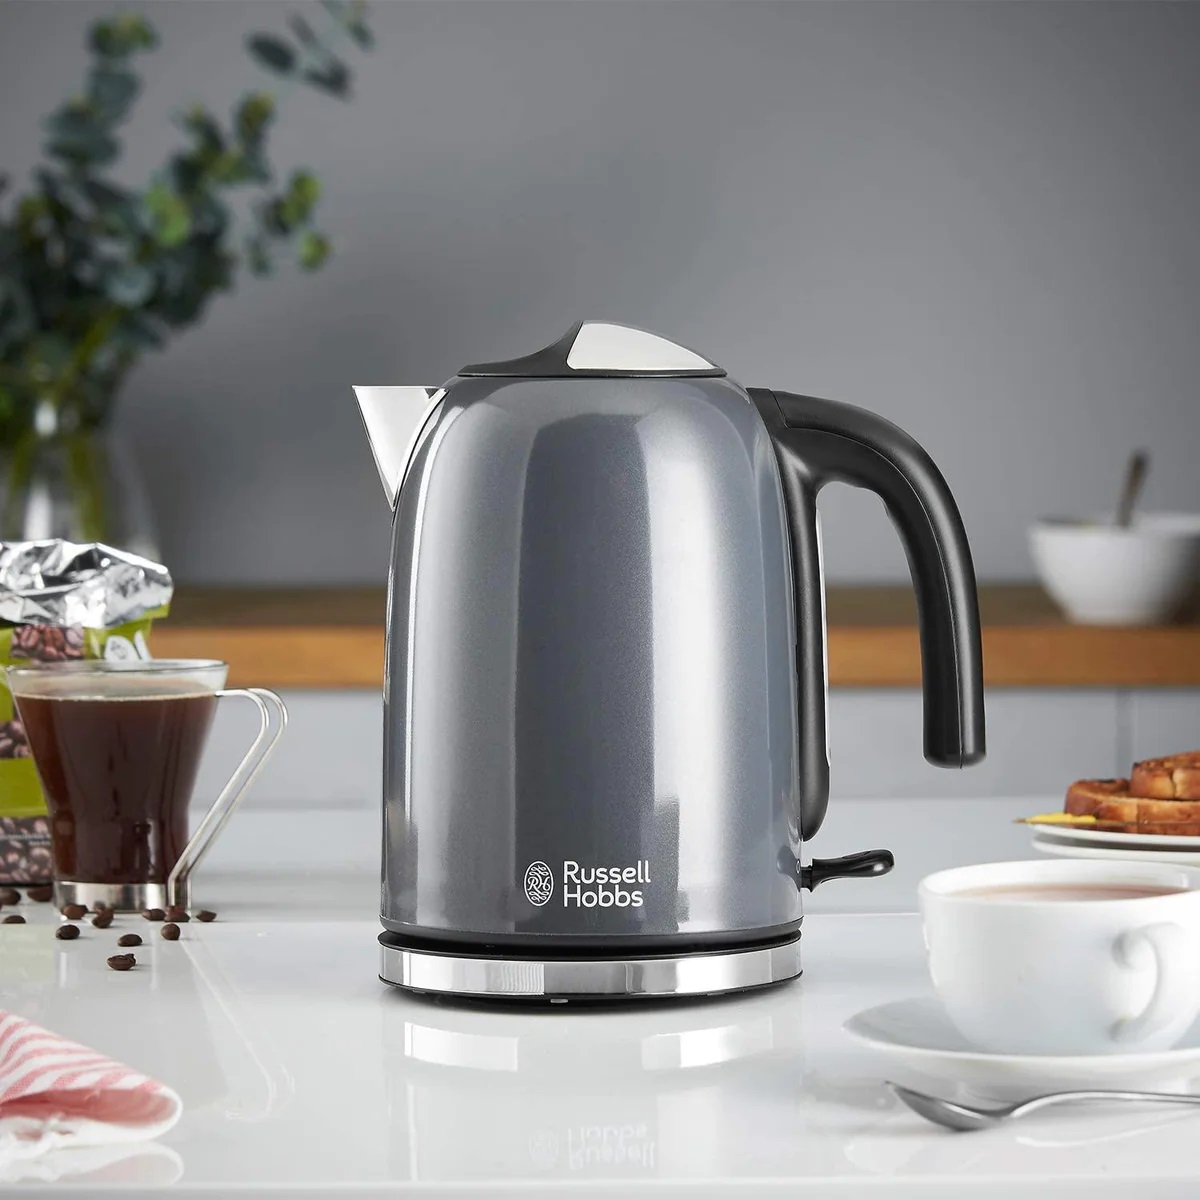 https://storables.com/wp-content/uploads/2023/11/12-best-russell-hobbs-electric-kettle-for-2023-1700116422.jpg